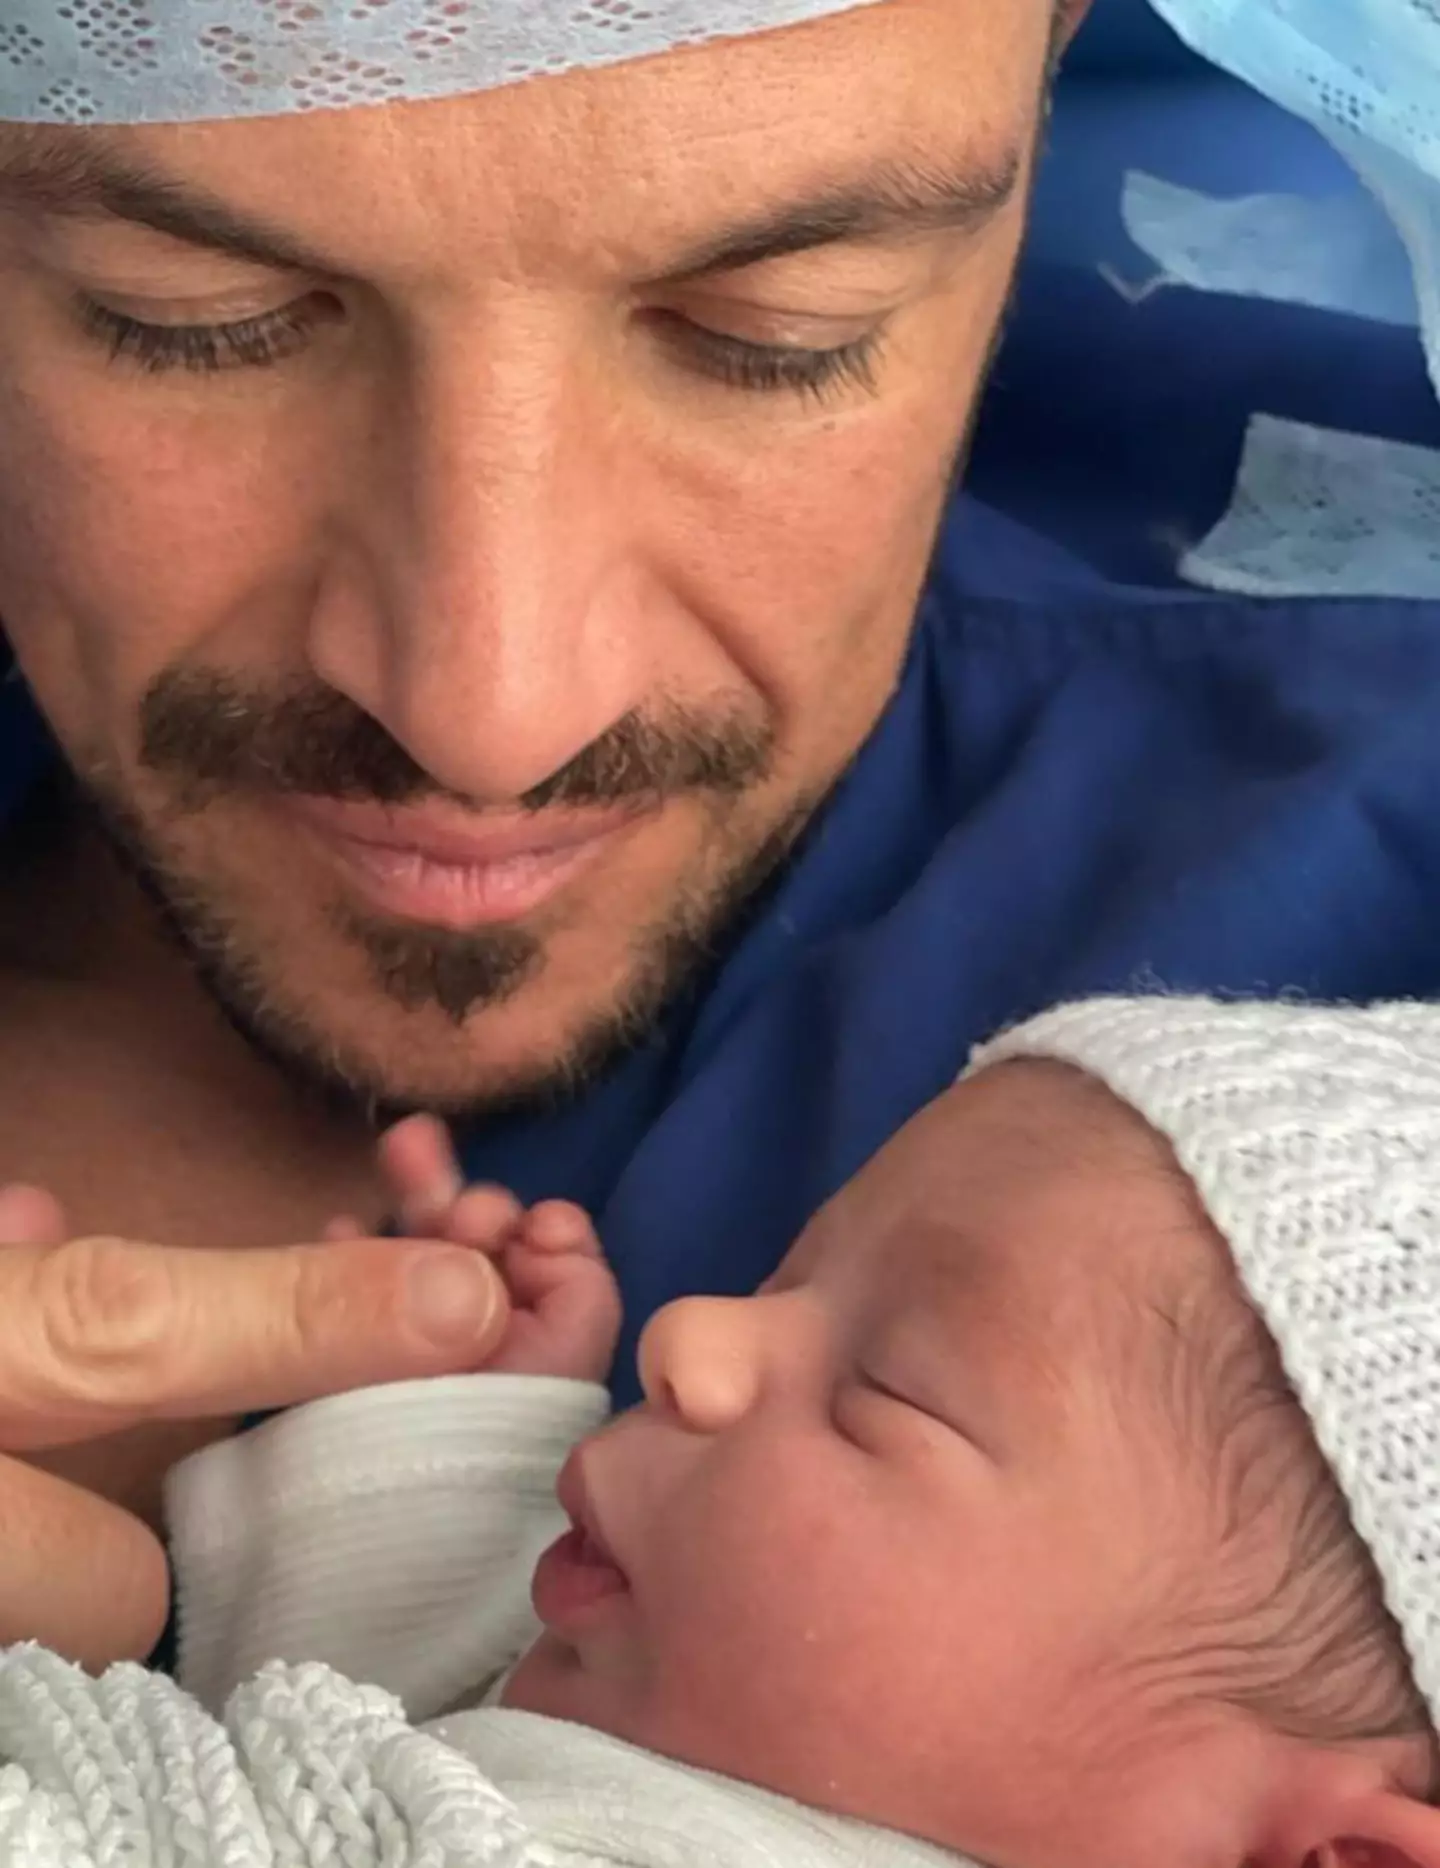 Peter Andre welcomed the birth of his daughter earlier this month. (Instagram/@peterandre)